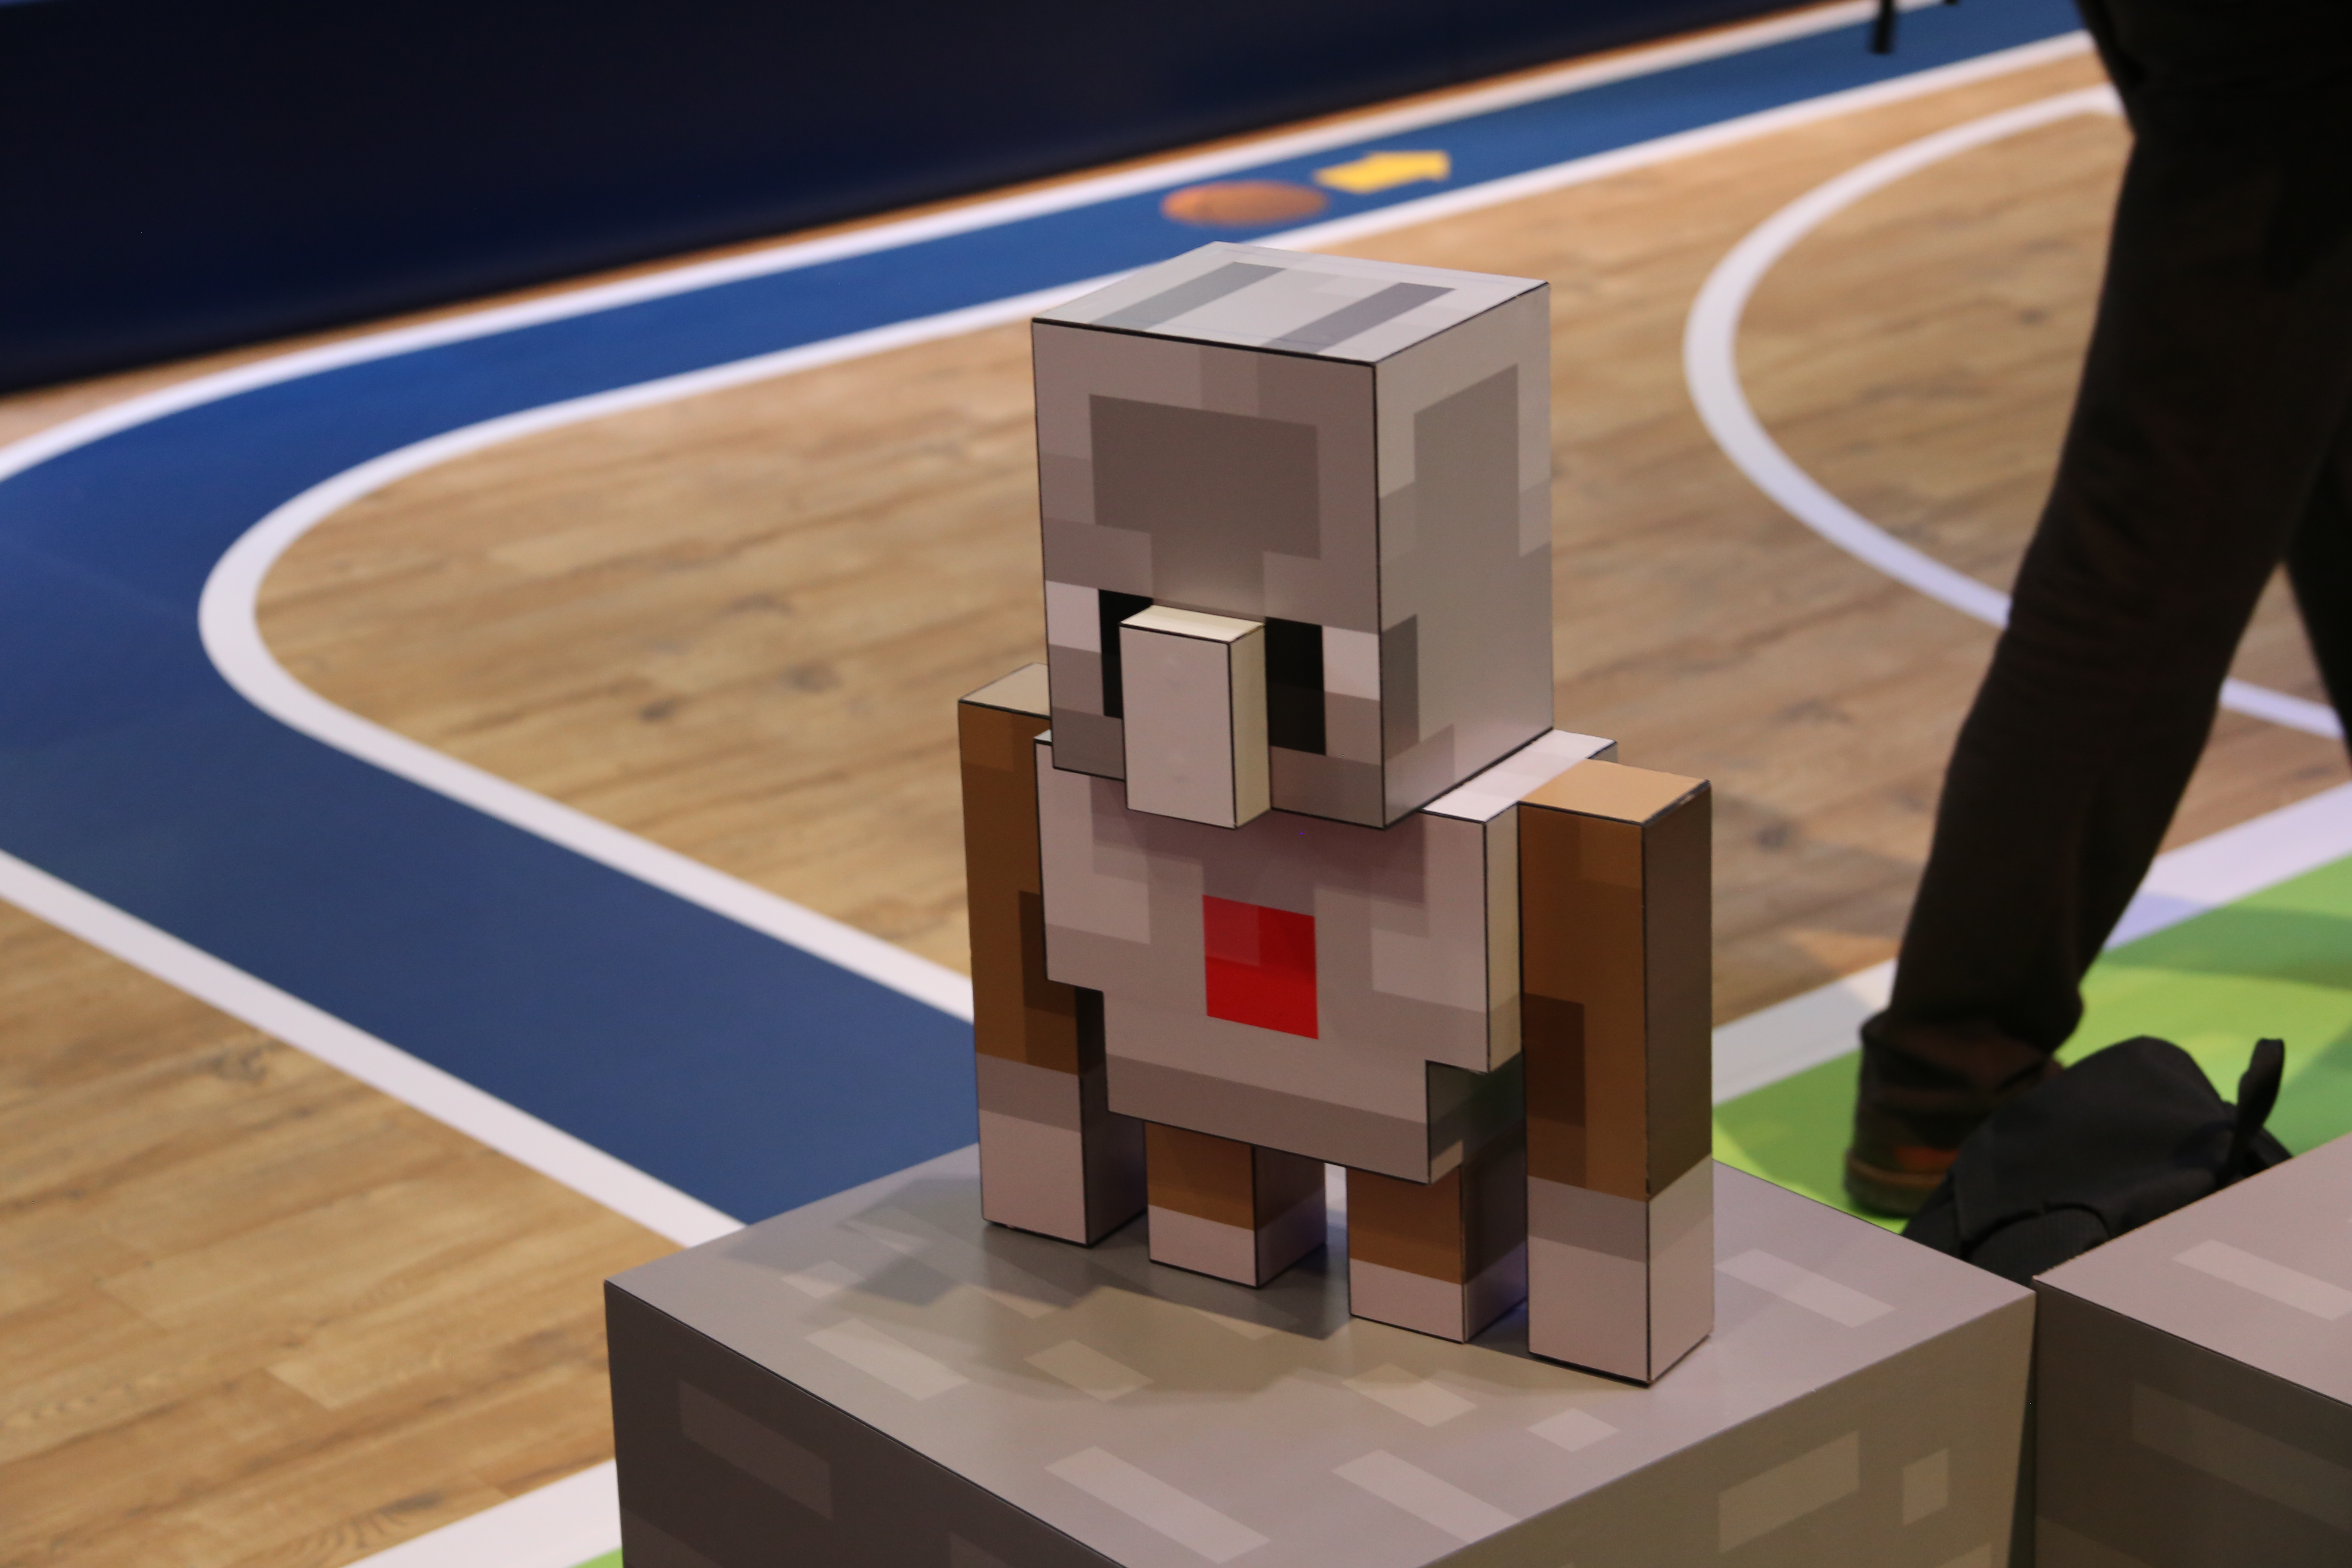 A model of a Minecraft agent, which can be programmed to complete tasks